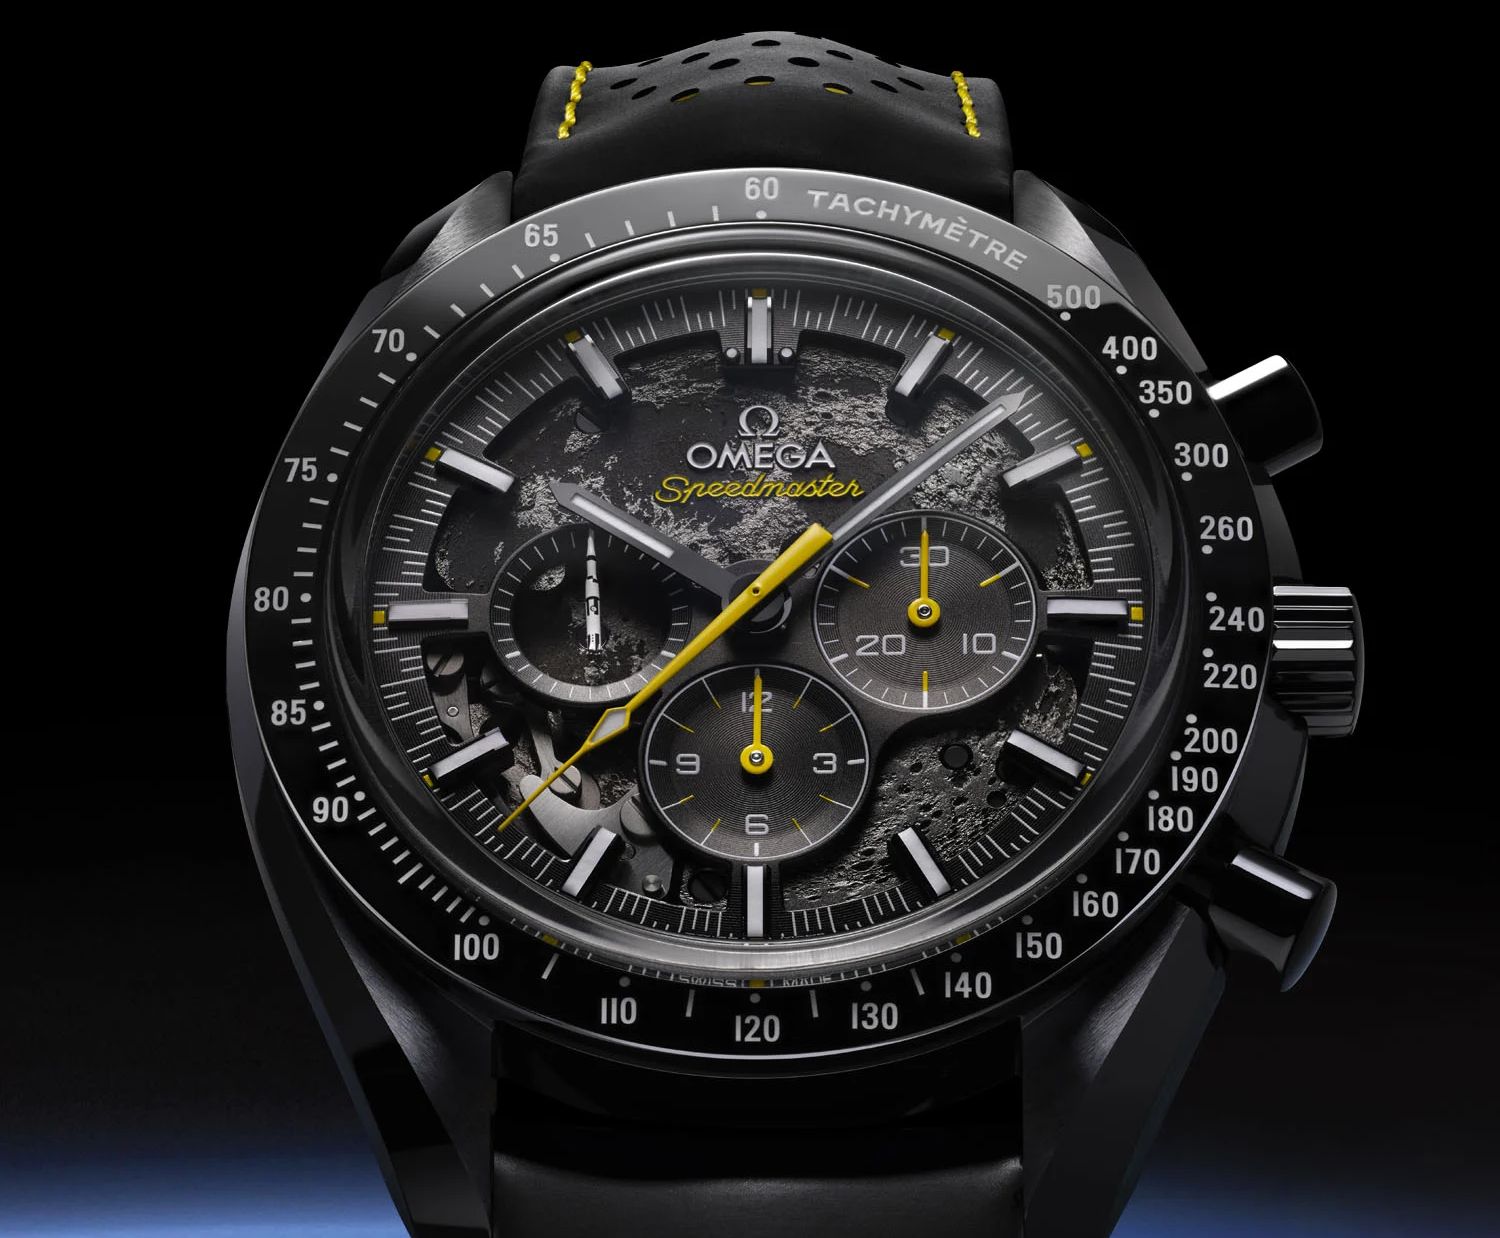 Omega has updated the Speedmaster Dark Side of the Moon